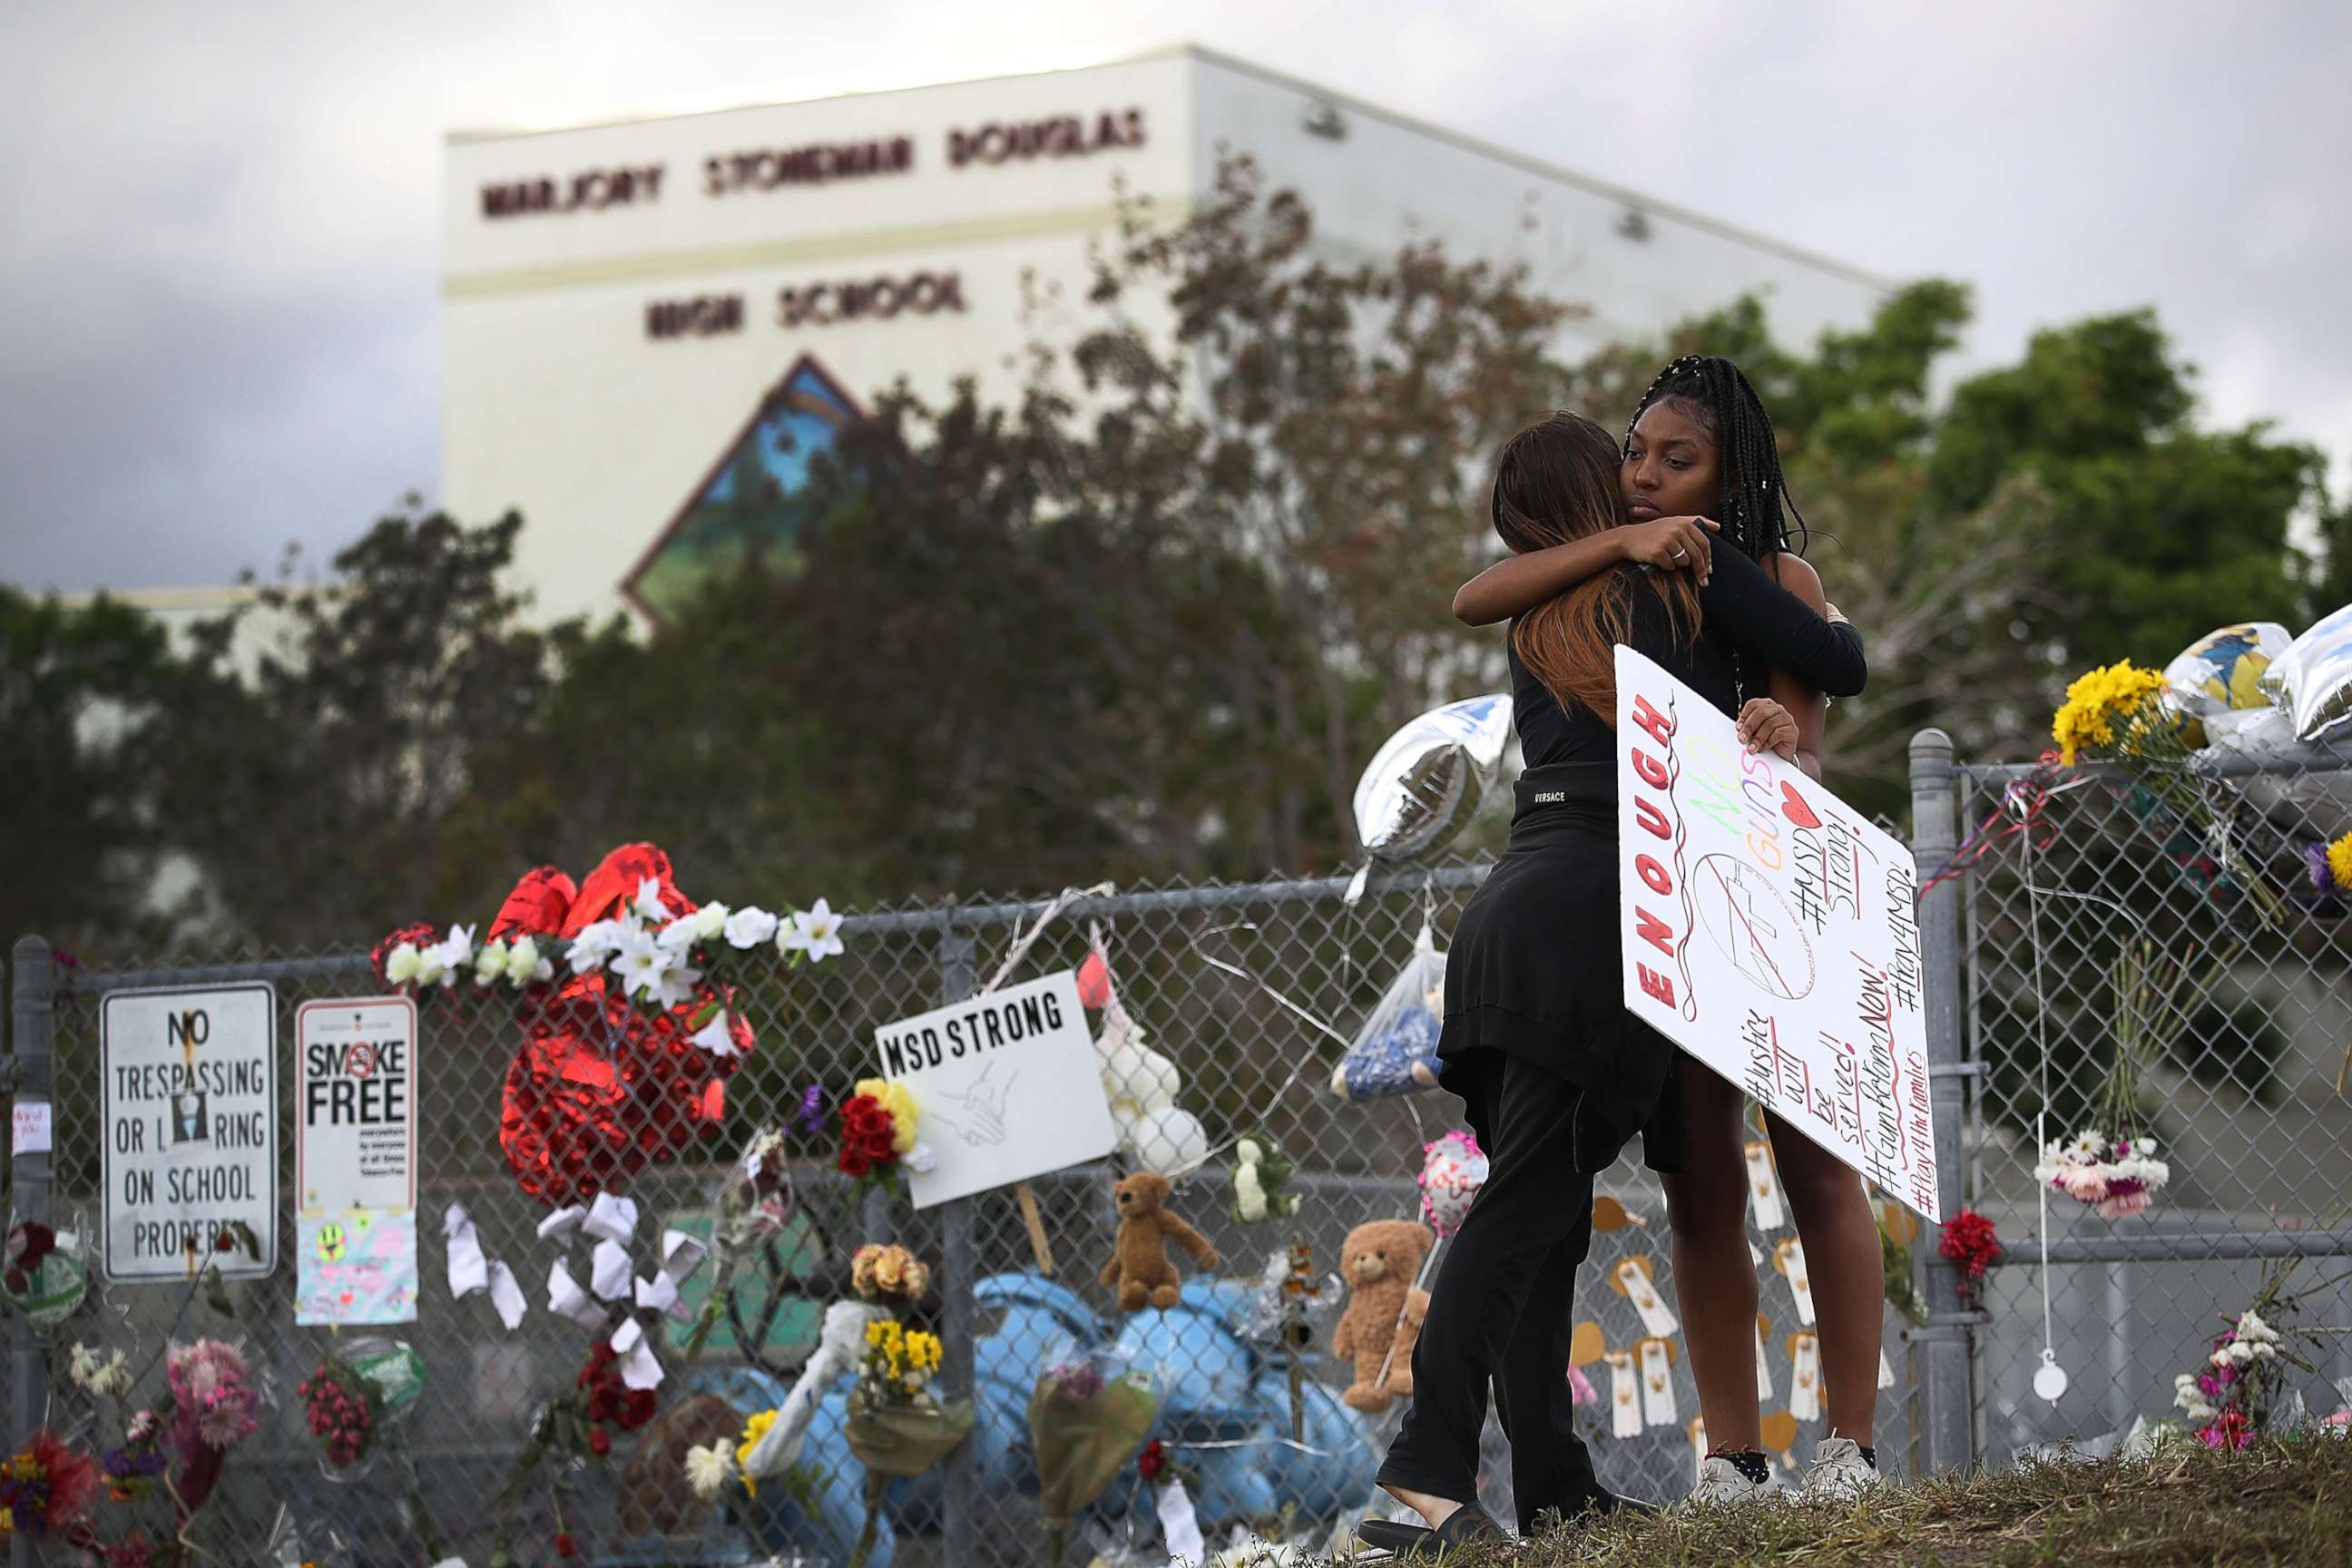 PHOTO: Tyra Heman, right, a senior at Marjory Stoneman Douglas High School, is hugged by Rachael Buto in front of the school where 17 people were killed in a mass shooting, Feb. 19, 2018 in Parkland, Fla.